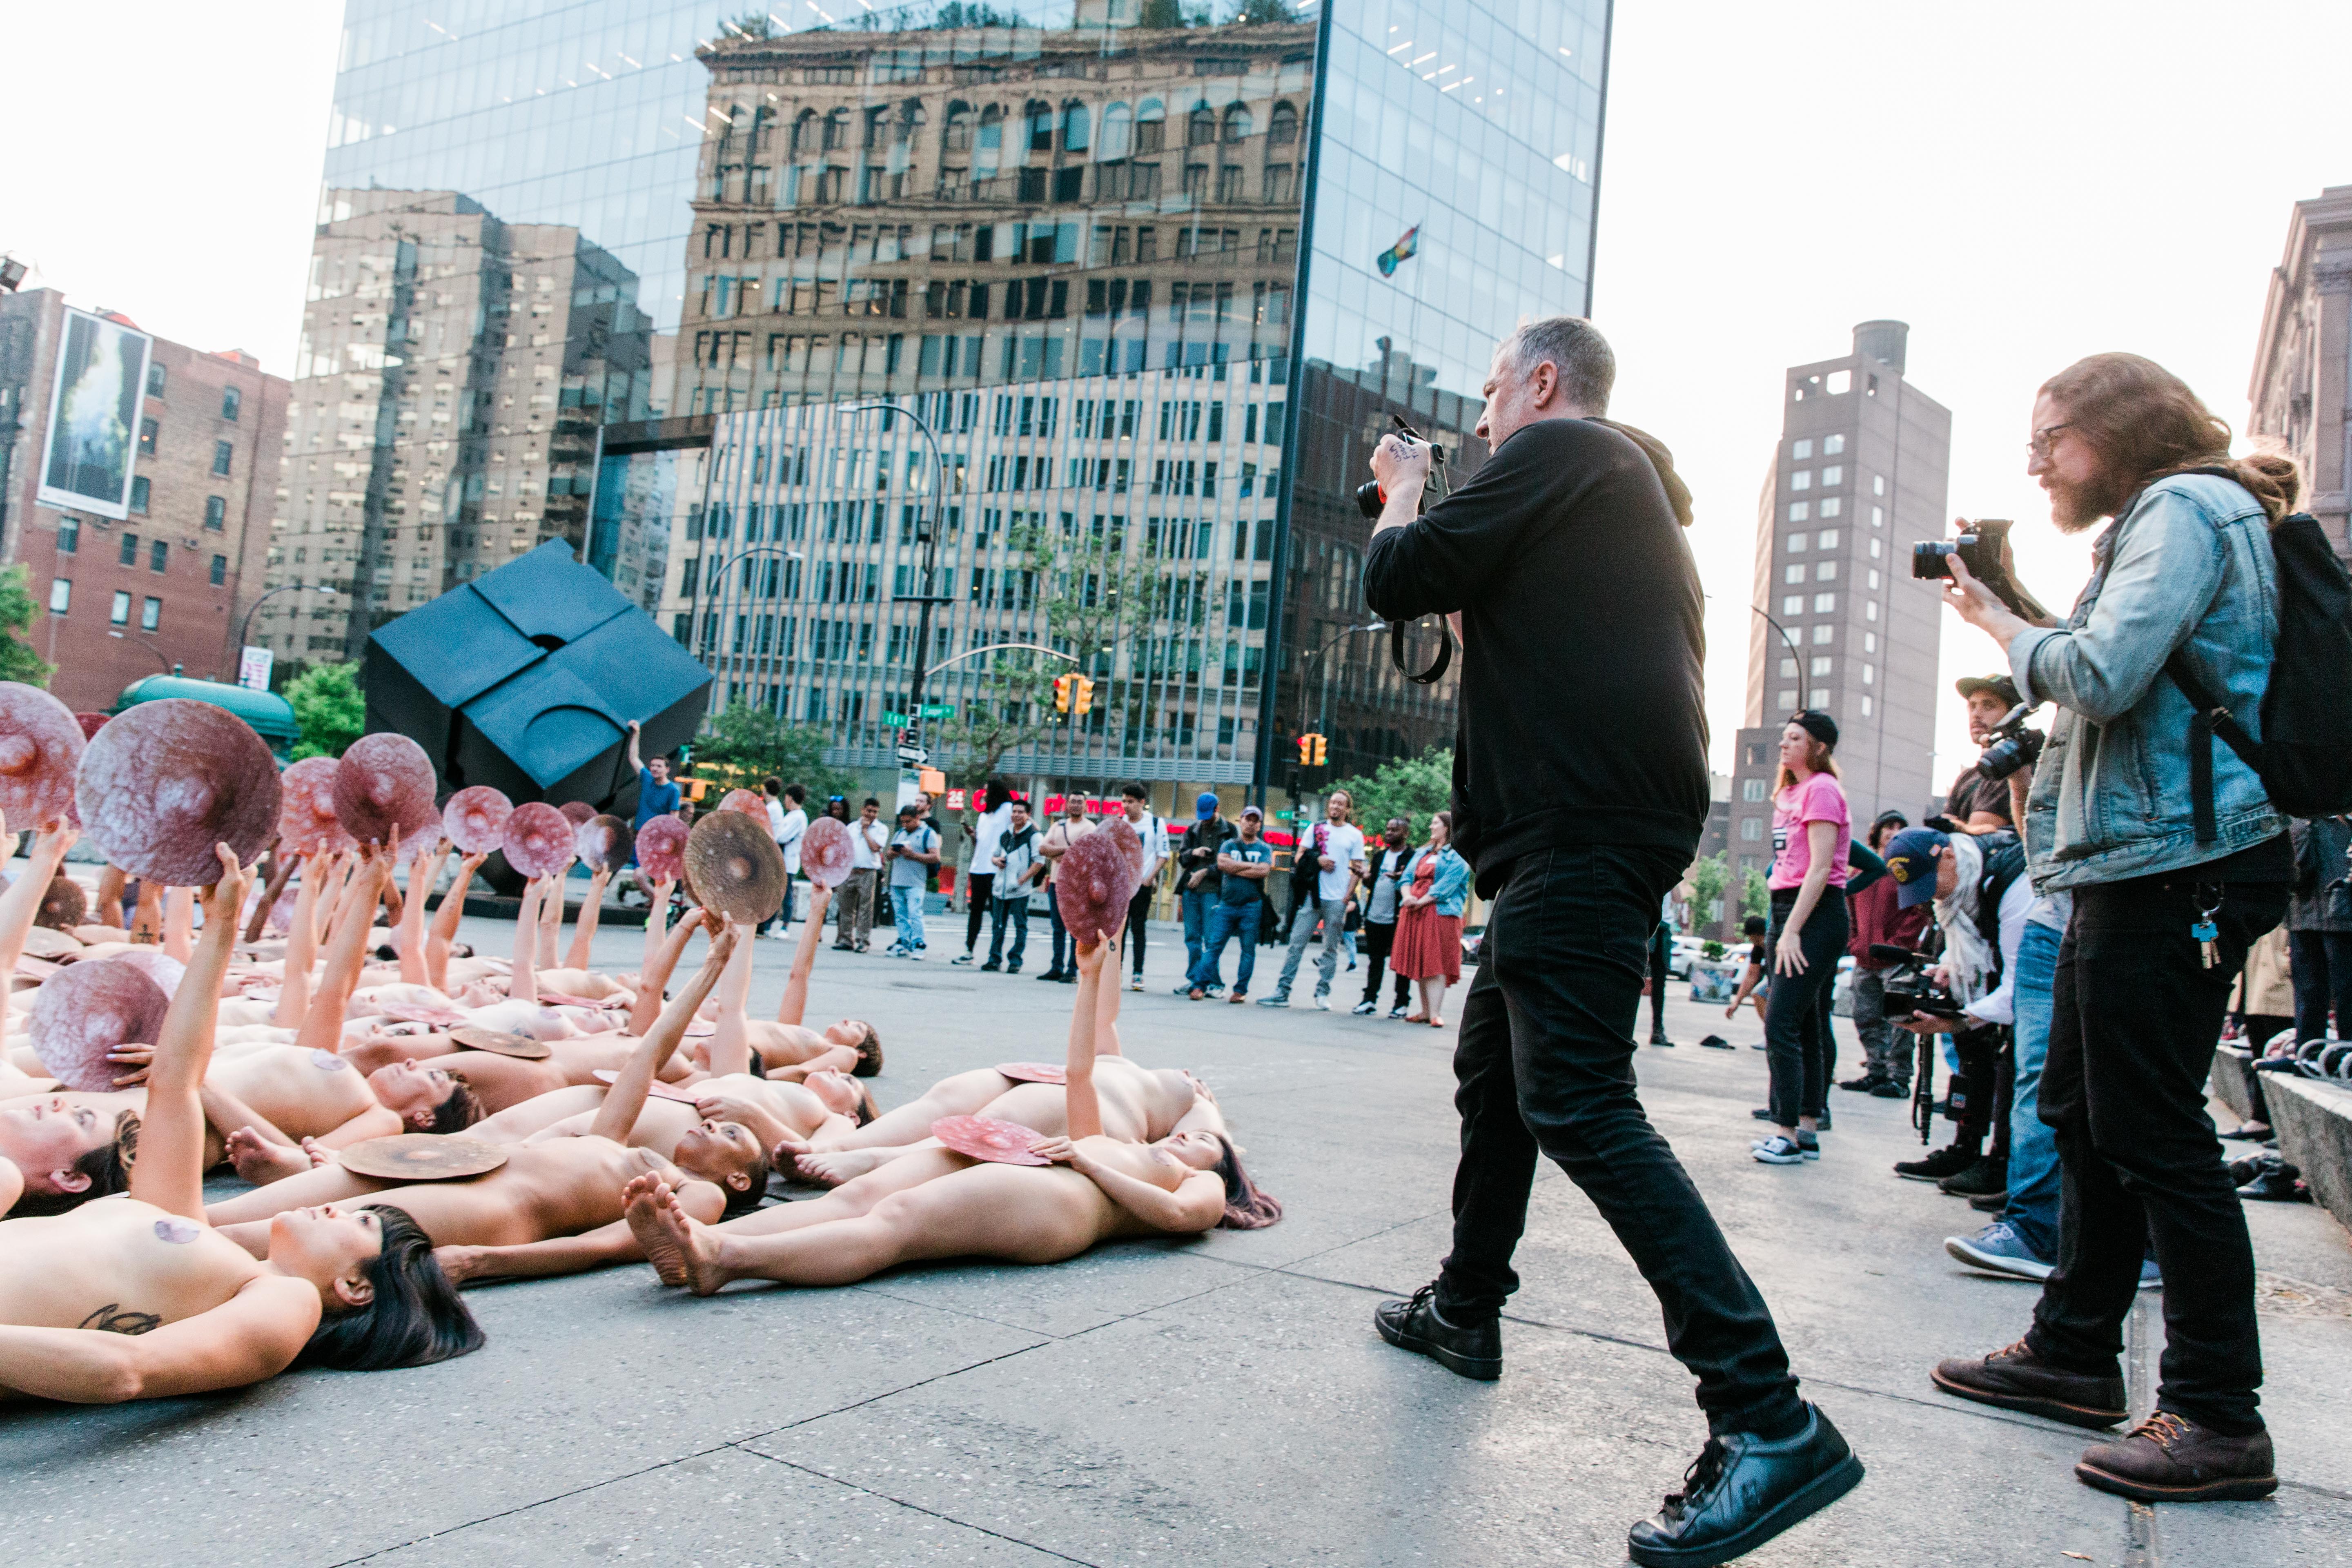 Artist Spencer Tunick took photos as part of a protest against Facebook's censorship policies on Sunday morning in New York. (Fay Fox)